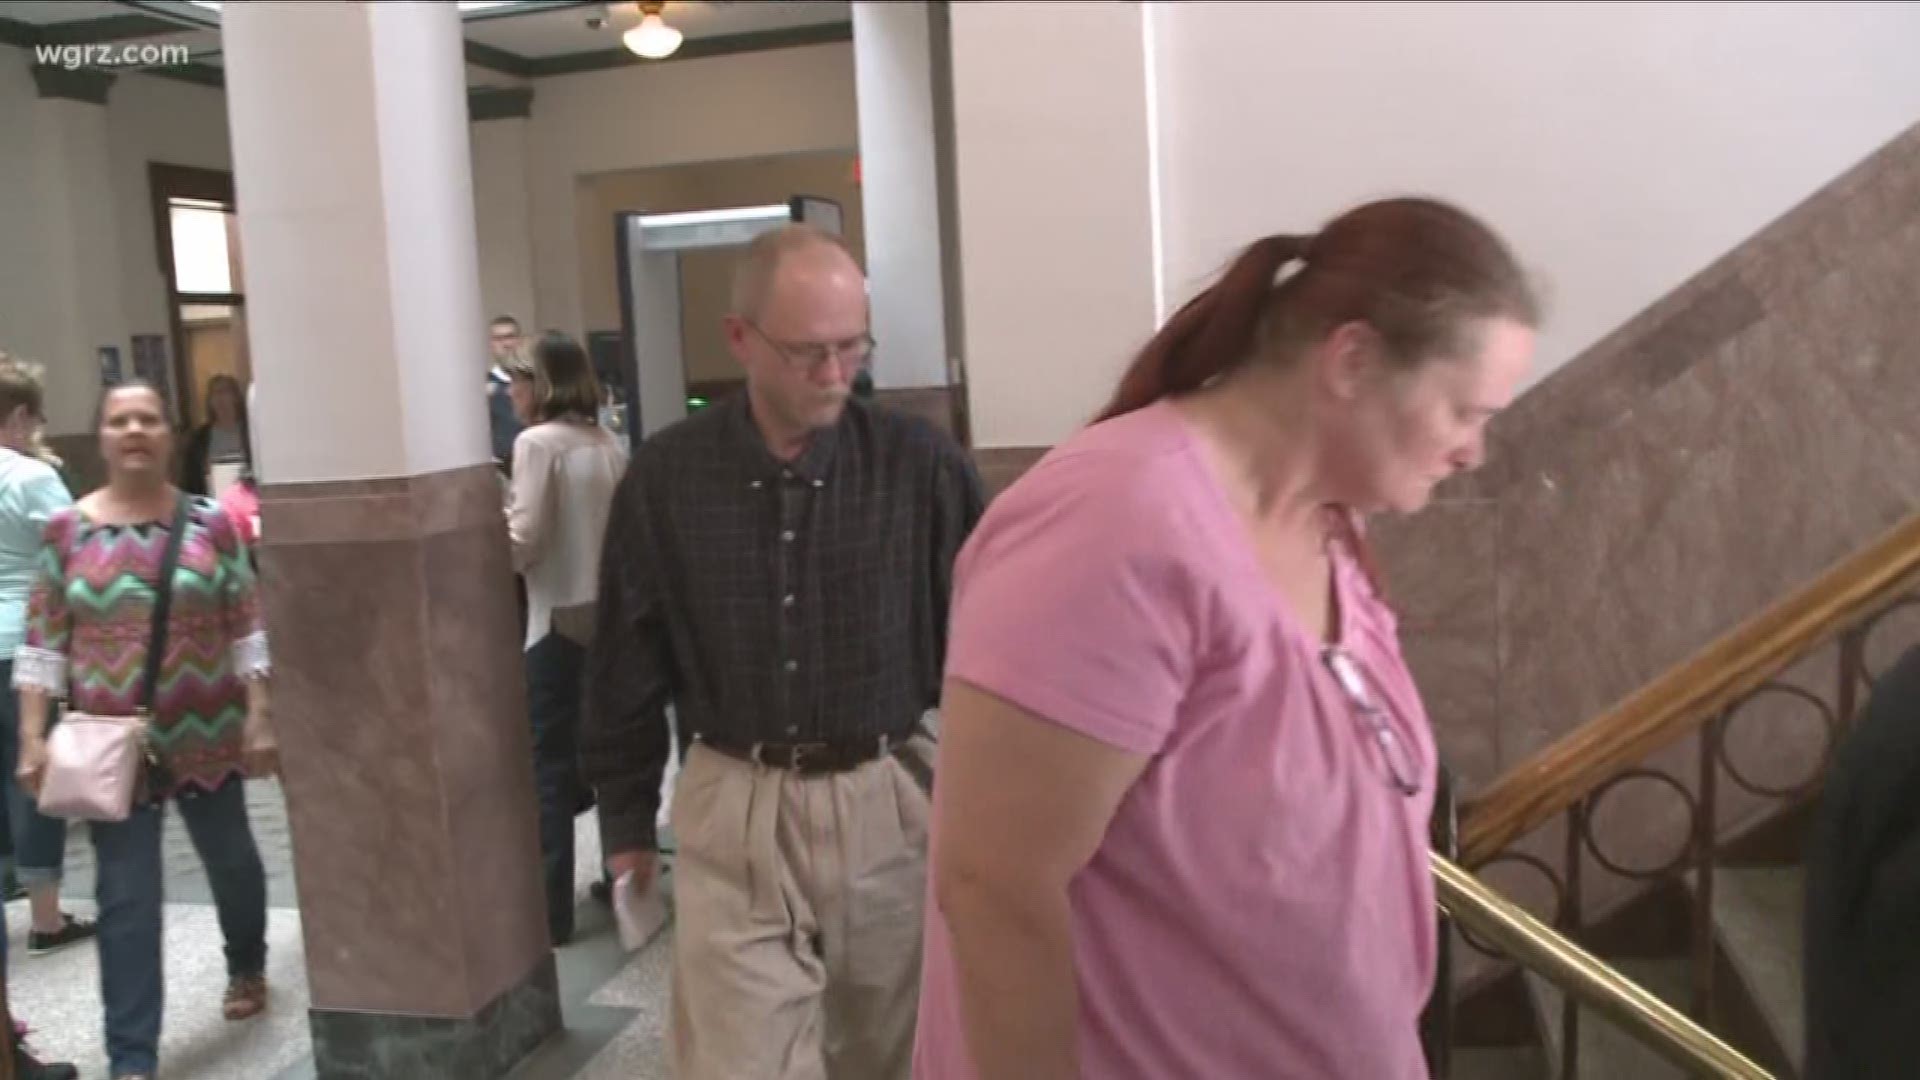 Joseph Barwick and Dorthy Adama were in city court today as their animal abuse case moves forward.